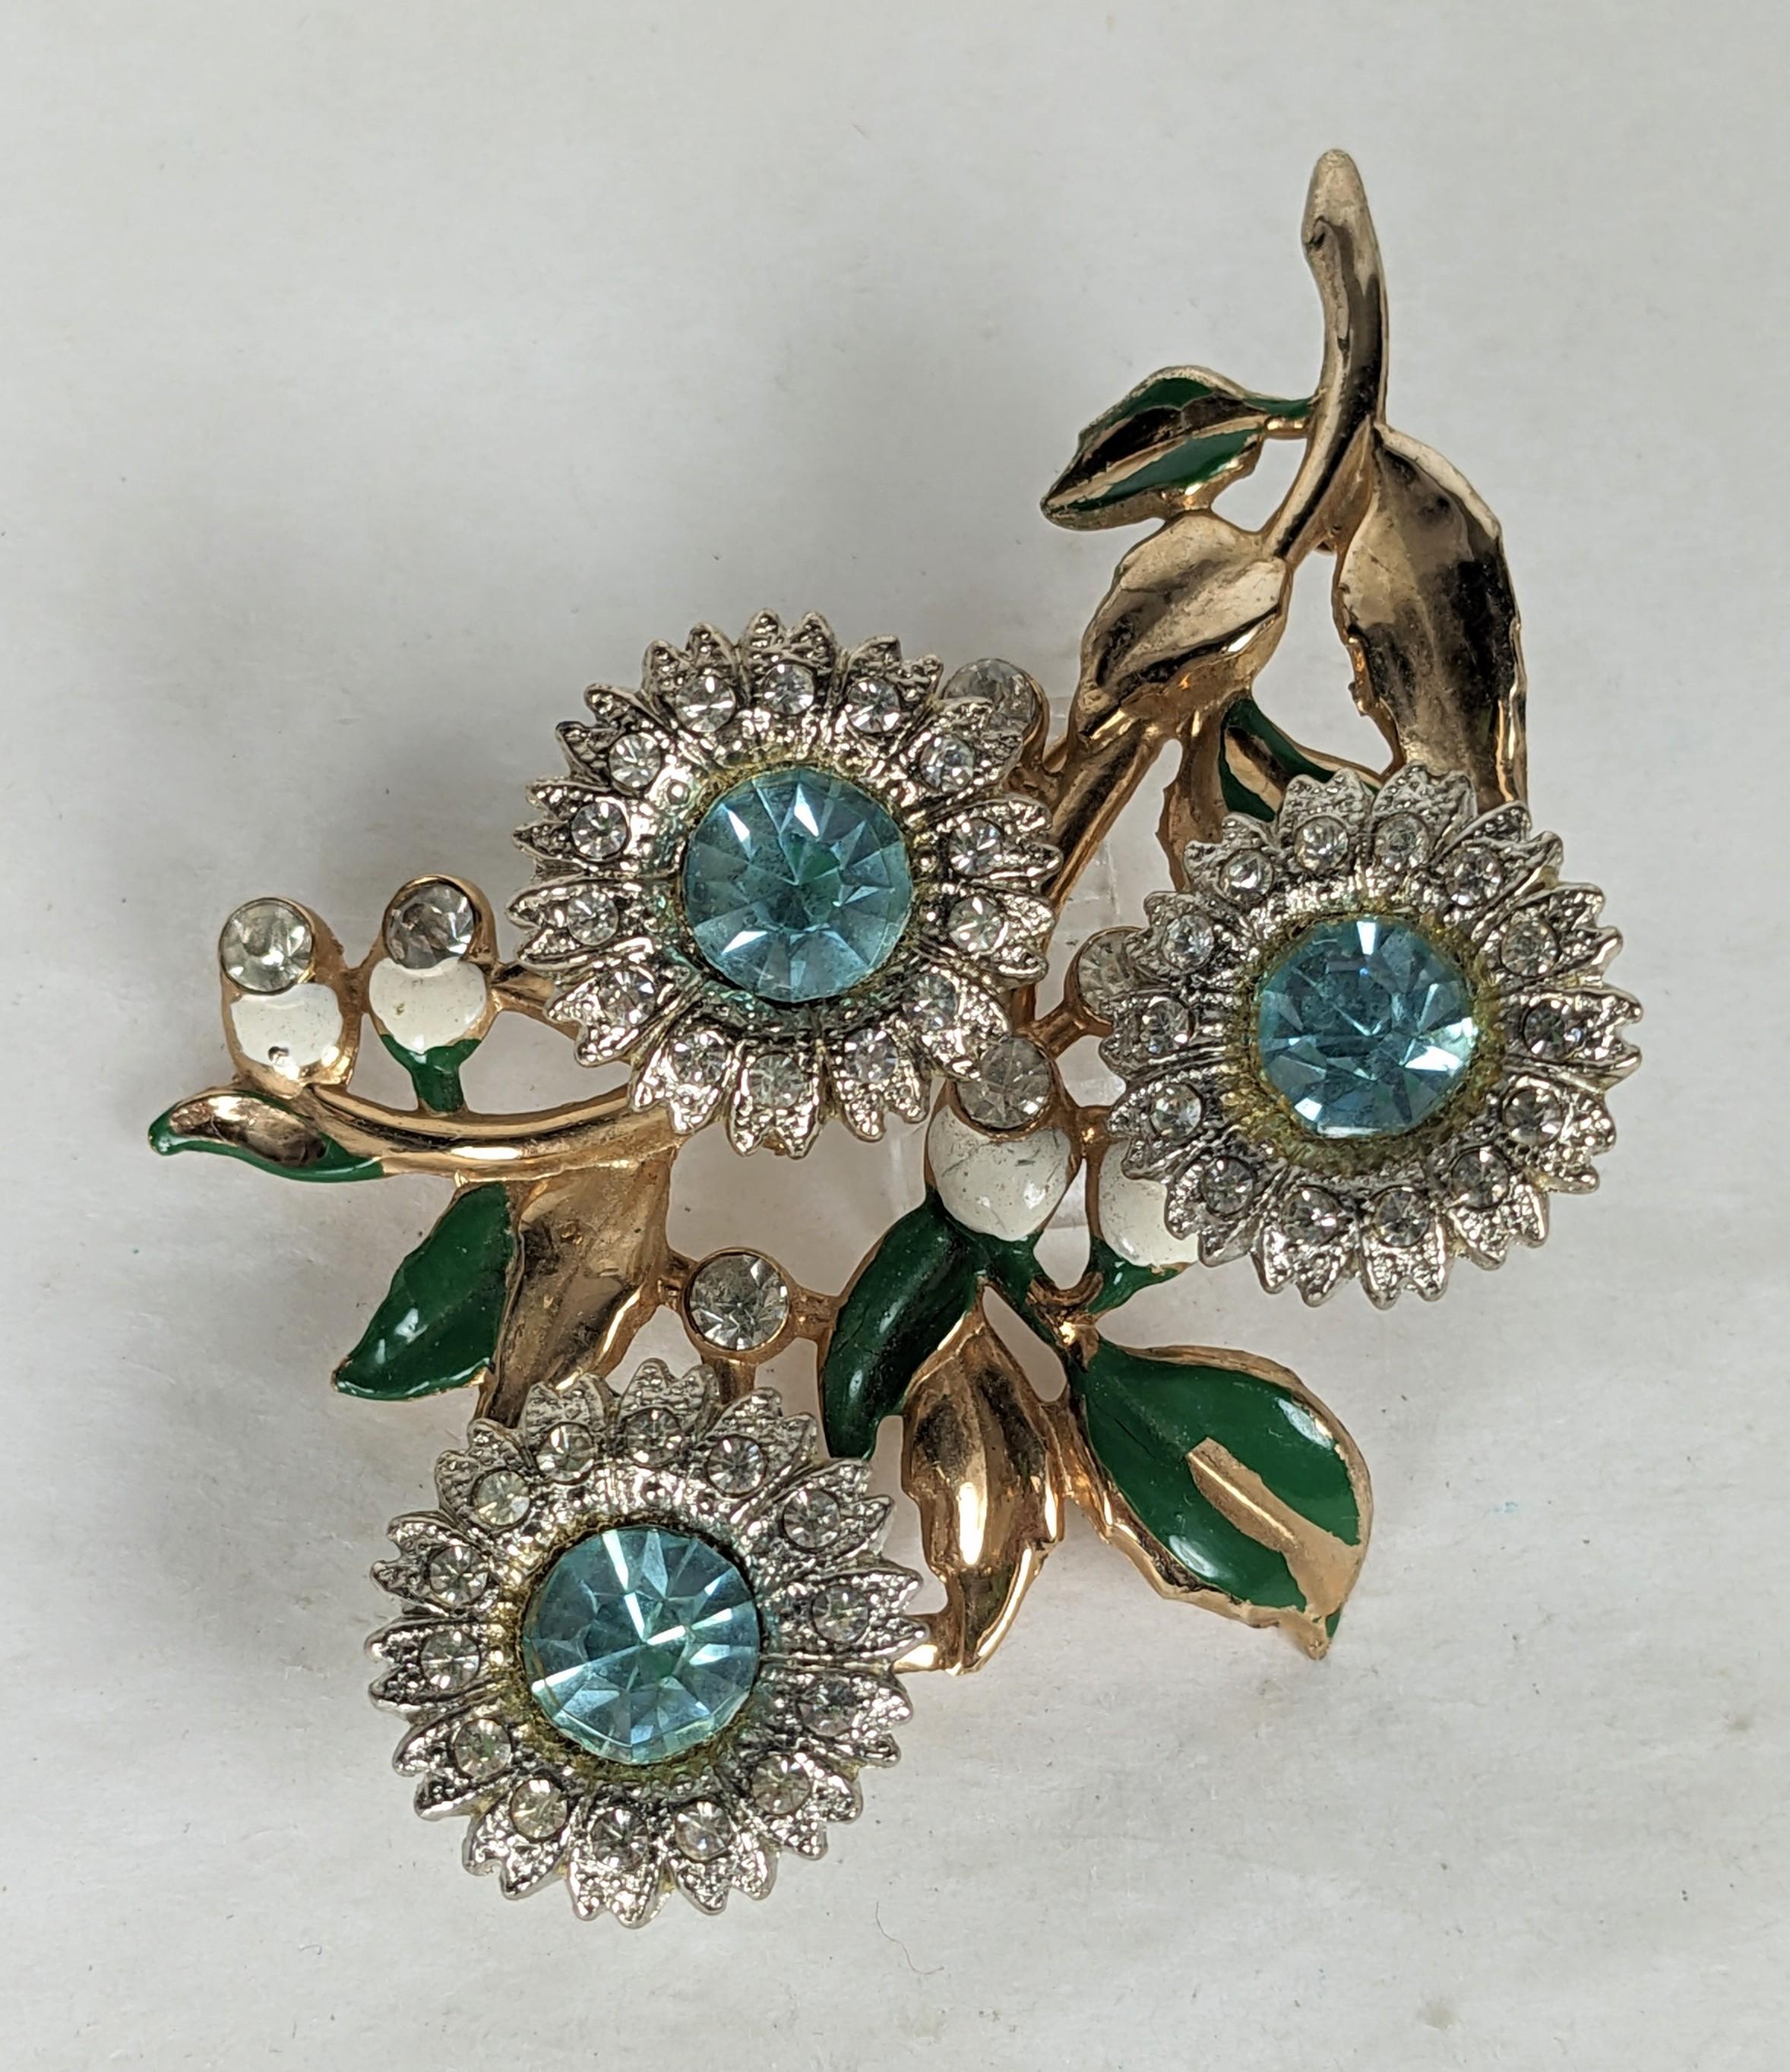 Art Deco Tremblant Flower Brooch from the 1930's highlighted with aqua pastes, crystal pave and enamel. Flowers are set in springs to tremble with wearer, most likely made by Coro. 3